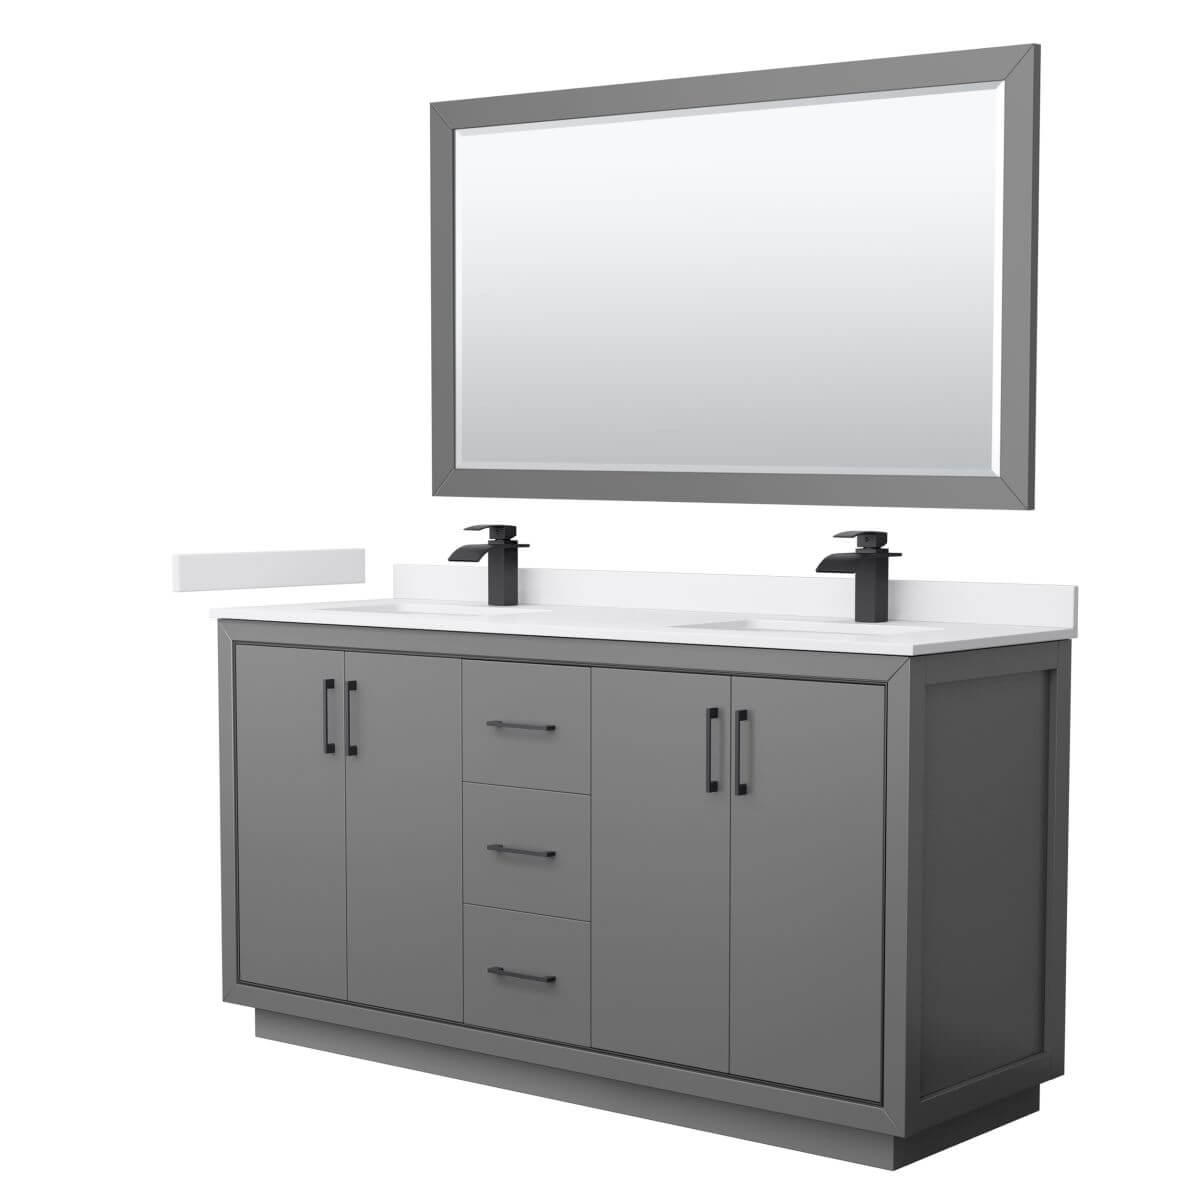 Wyndham Collection WCF111166DGBWCUNSM58 Icon 66 inch Double Bathroom Vanity in Dark Gray with White Cultured Marble Countertop, Undermount Square Sinks, Matte Black Trim and 58 Inch Mirror